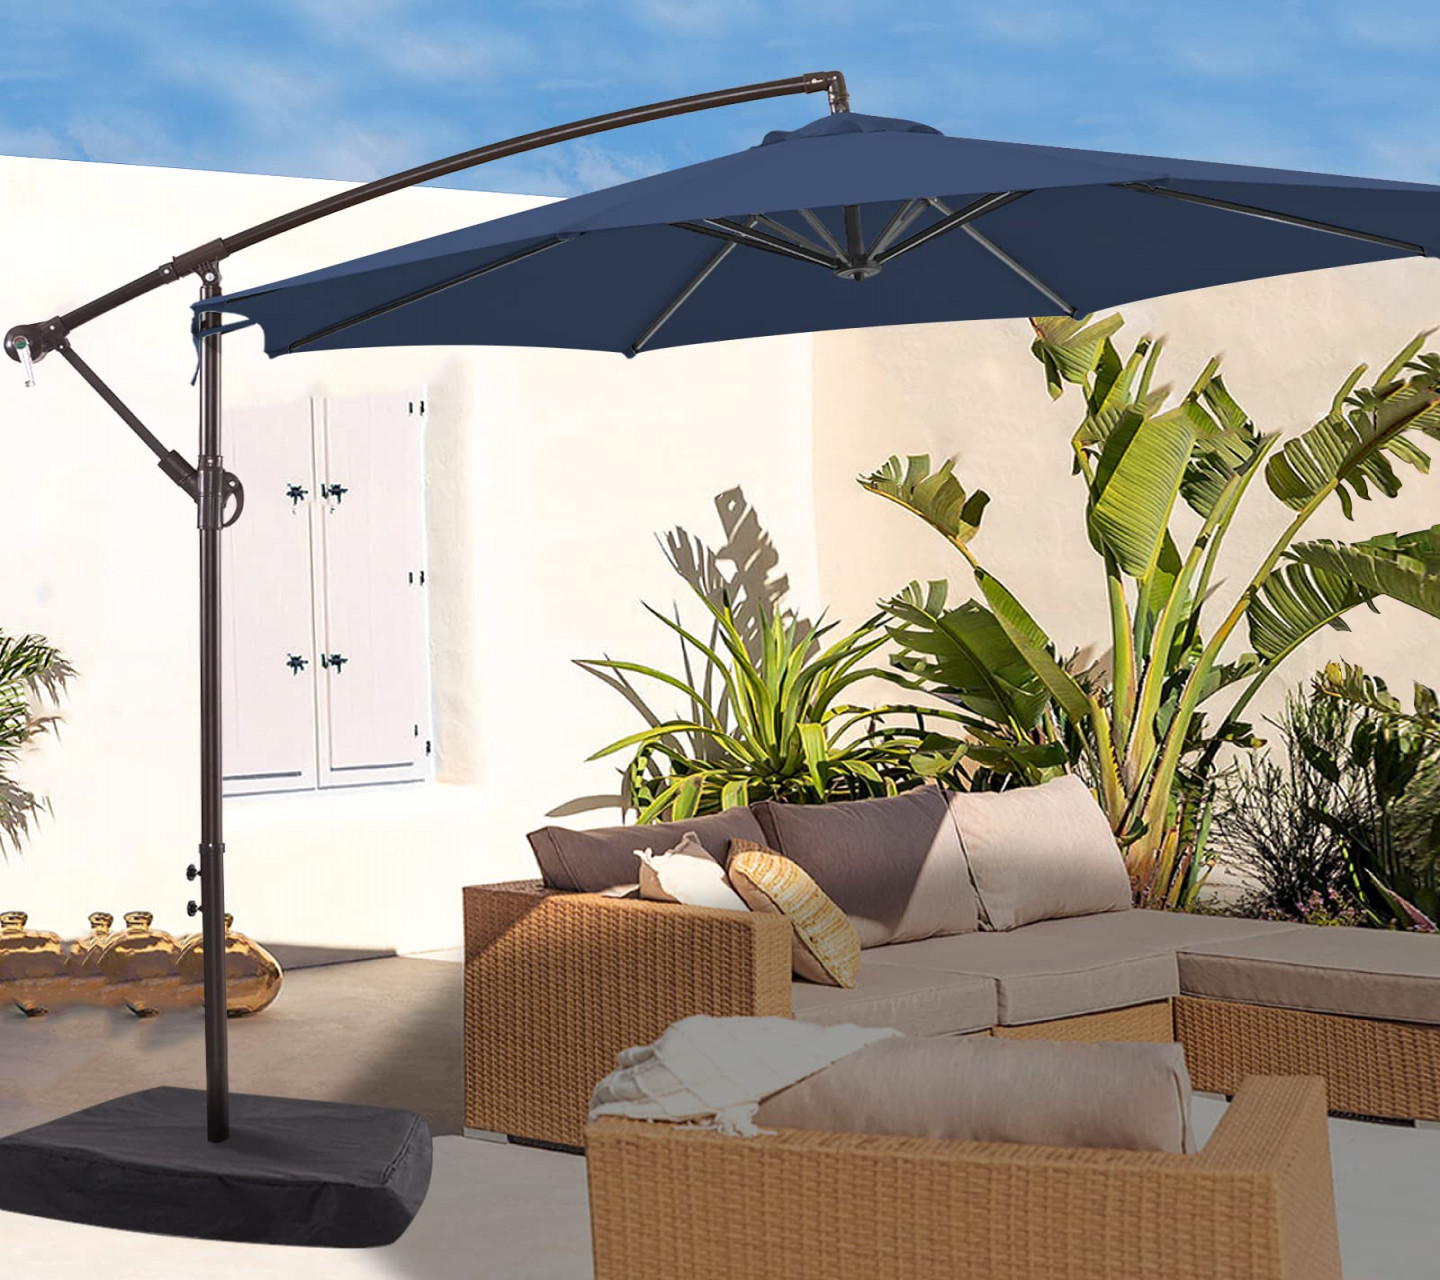 LE CONTE ft Patio Umbrella with Base Included, Outdoor Offset Cantilever  Umbrella with Fade Resistant POLYESTER DTY Canopy Infinite Tilt, Crank &